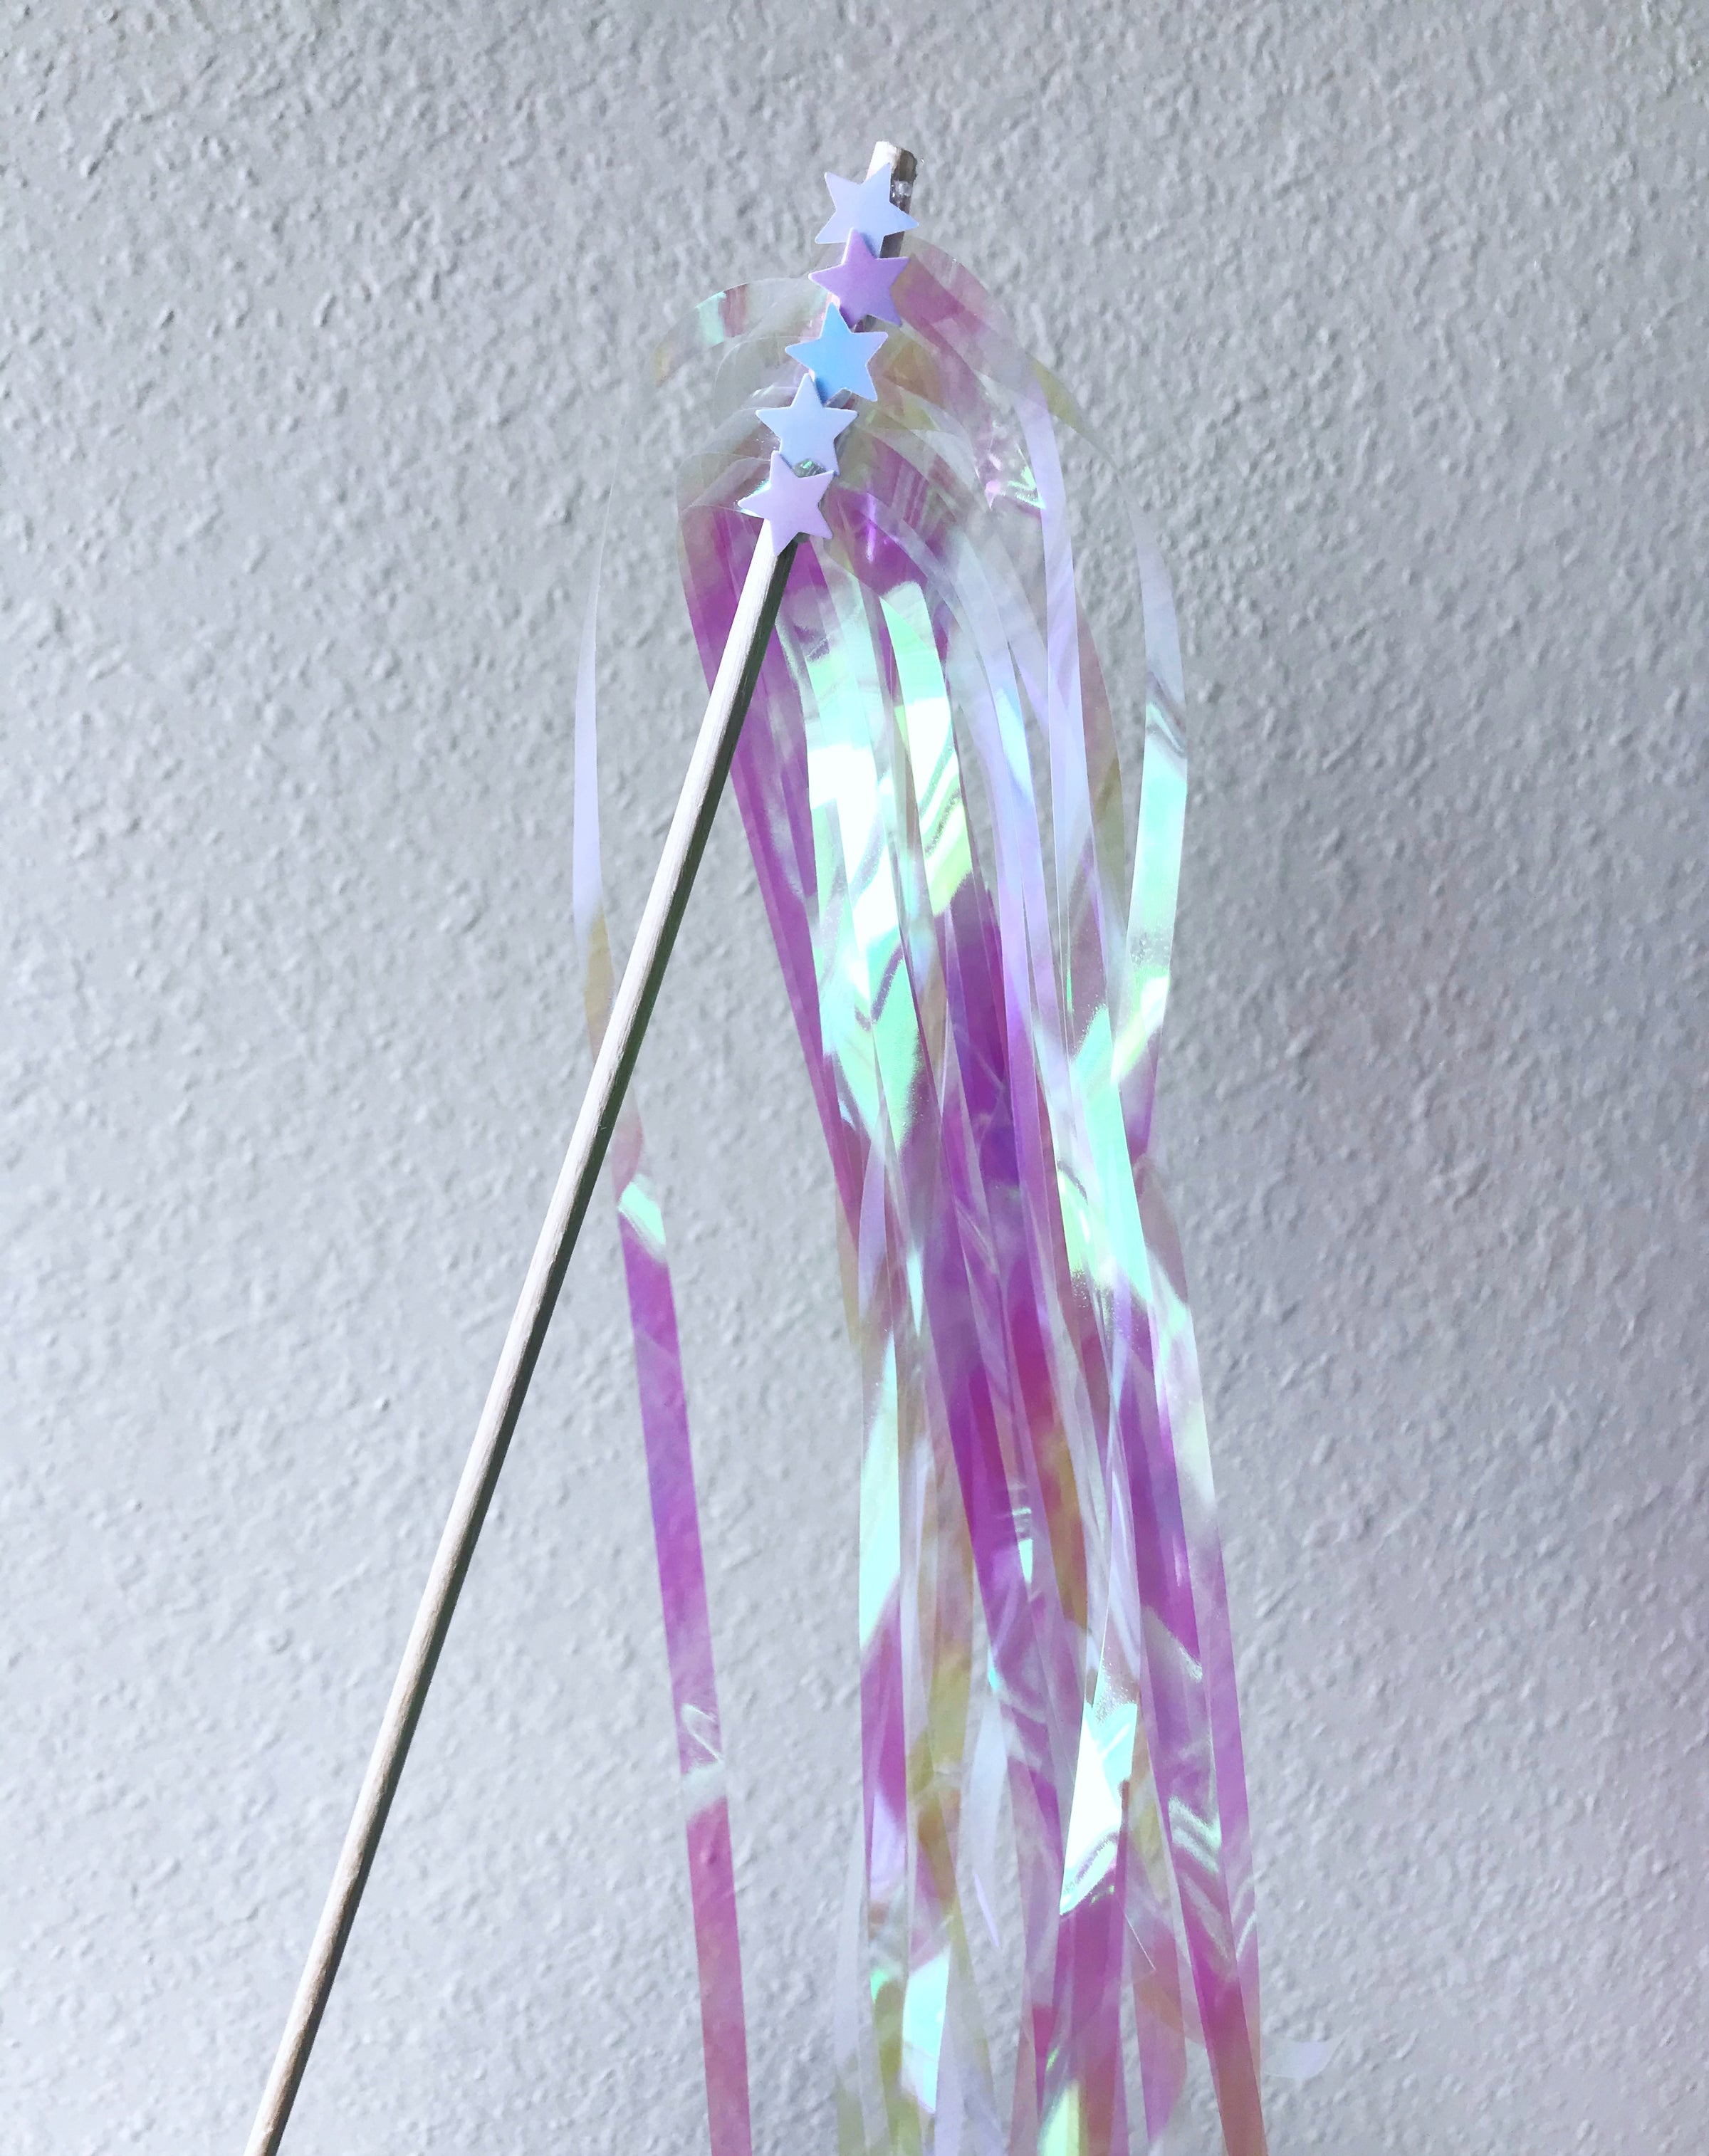 Iridescent Streamers Photos and Images & Pictures